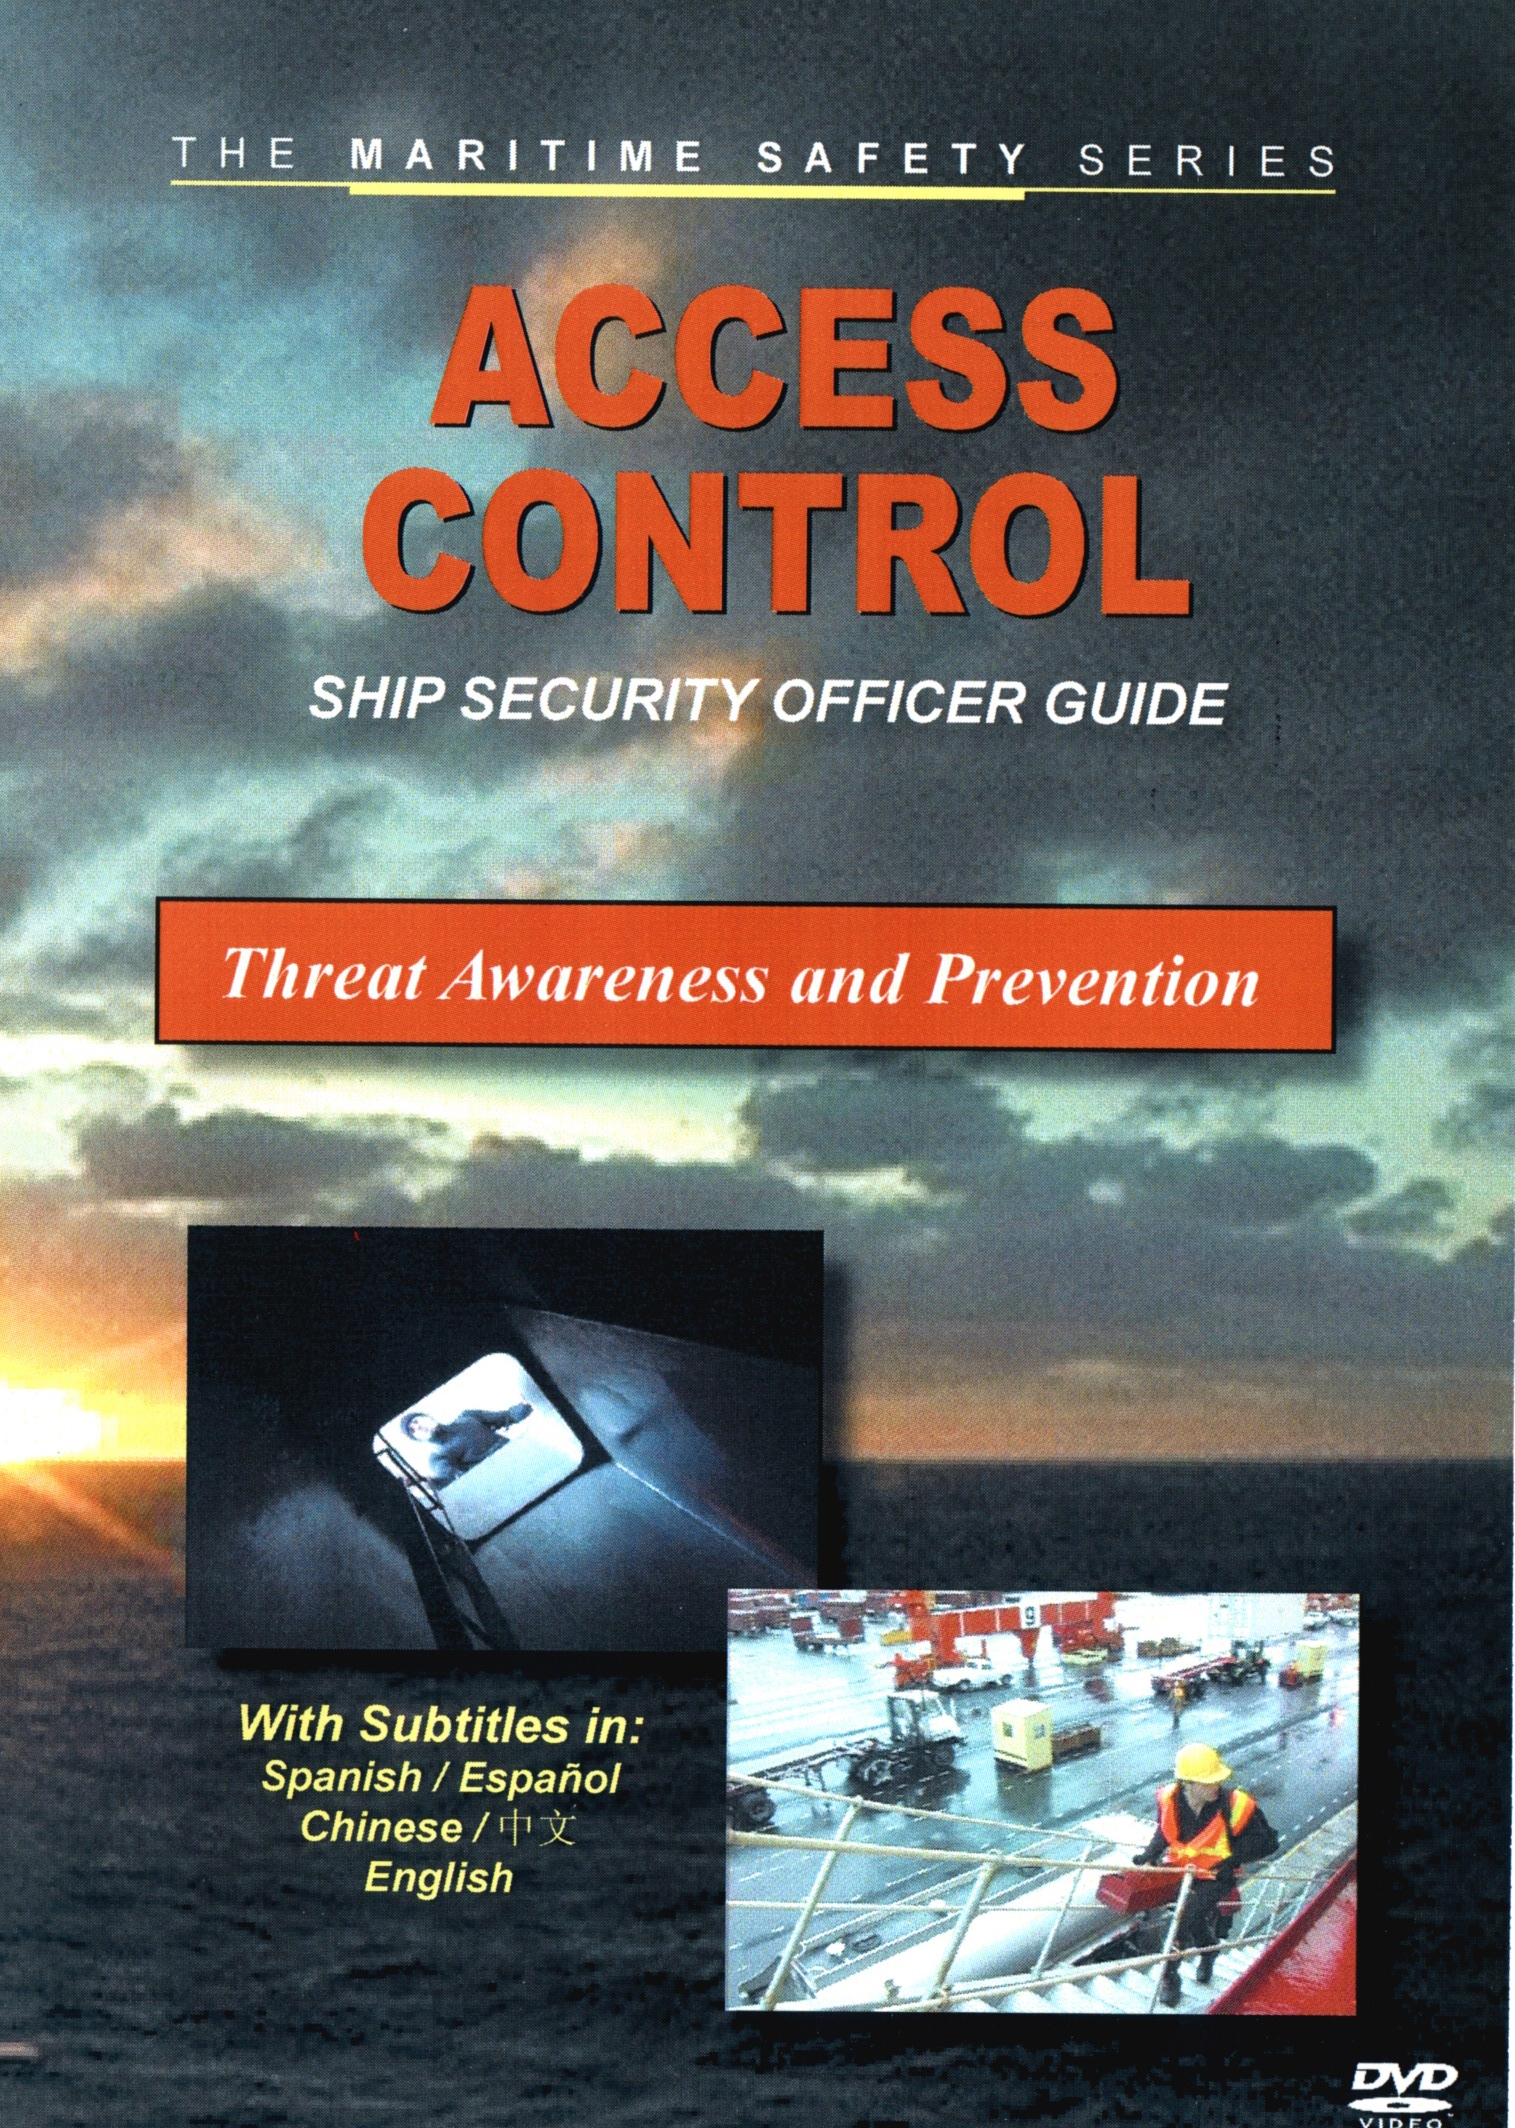 Access Control:Threat Awareness and Prevention steps